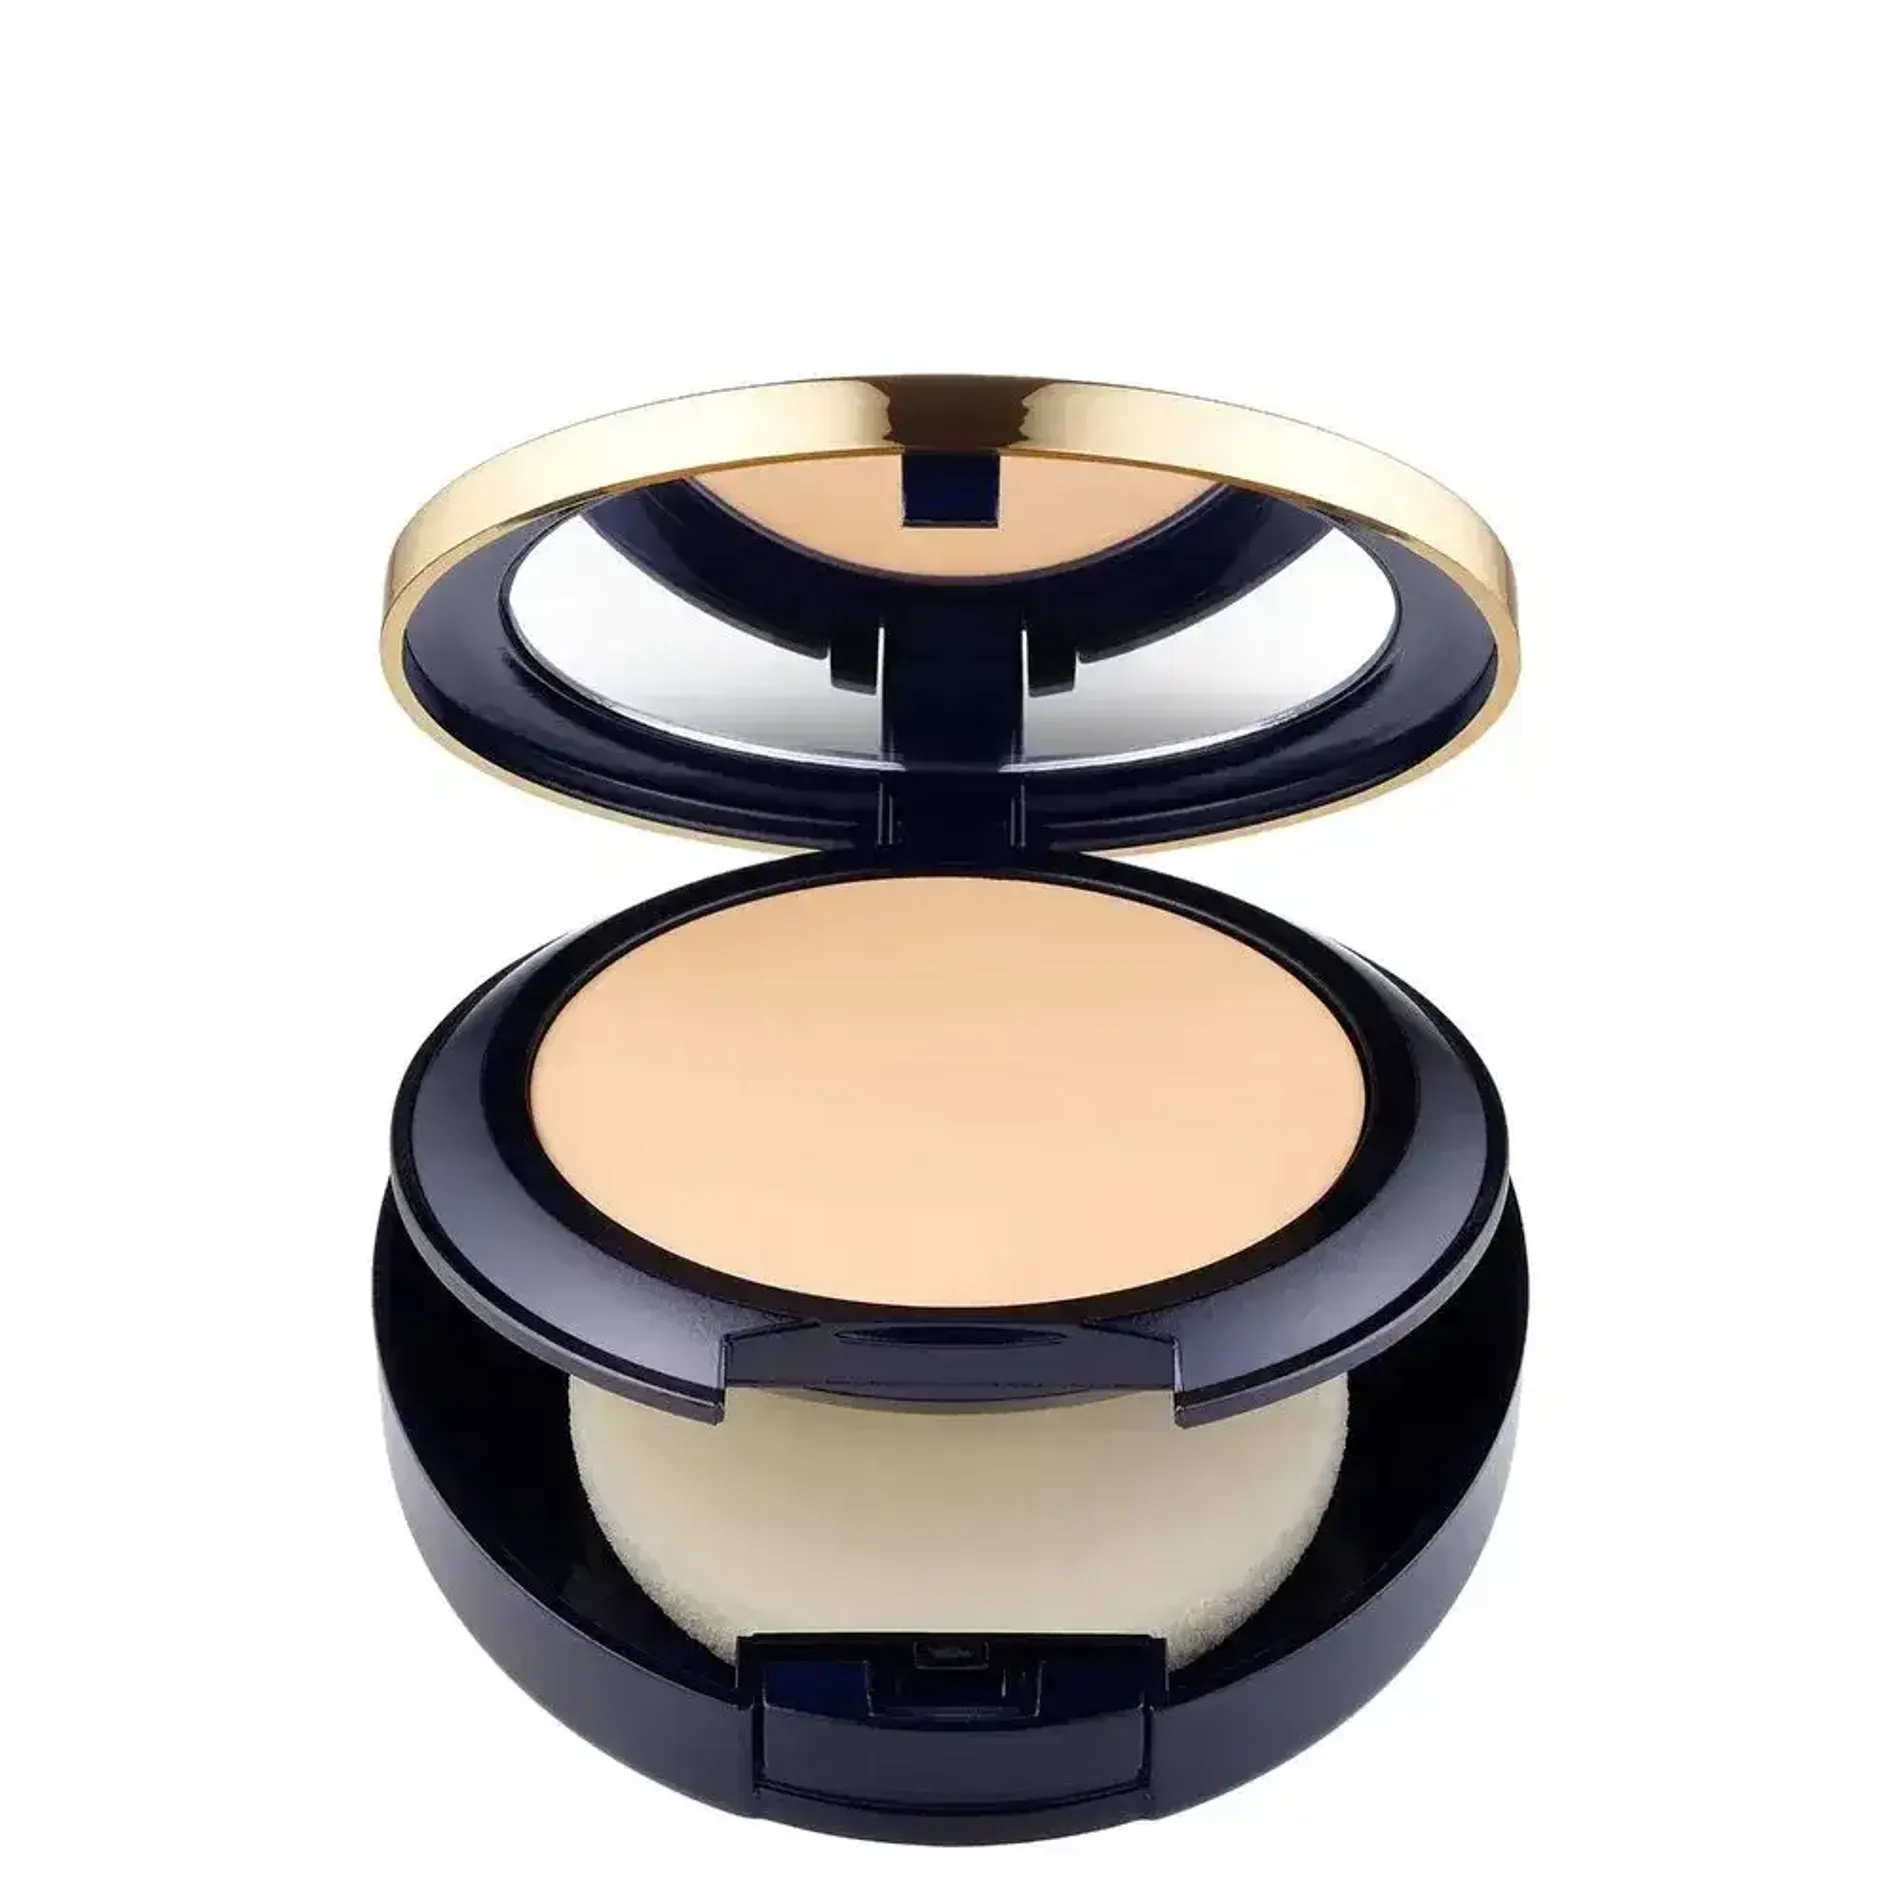 phan-phu-estee-lauder-double-wear-stay-in-place-matte-powder-foundation-12g-1